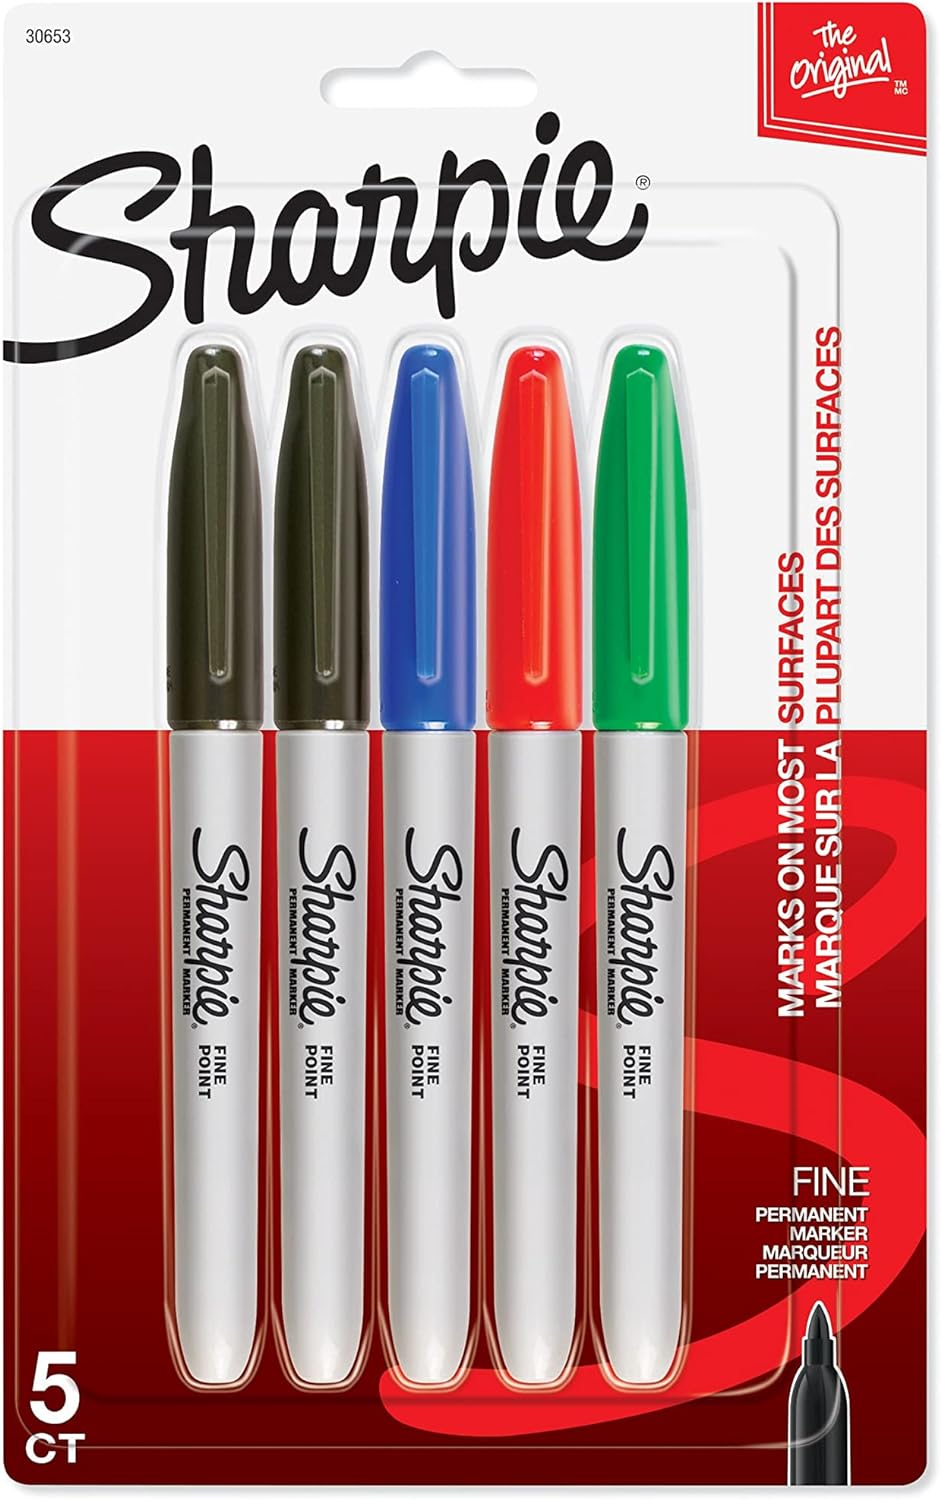 SHARPIE 10 Packs: 5 ct. (50 total) Fine Point Permanent Markers